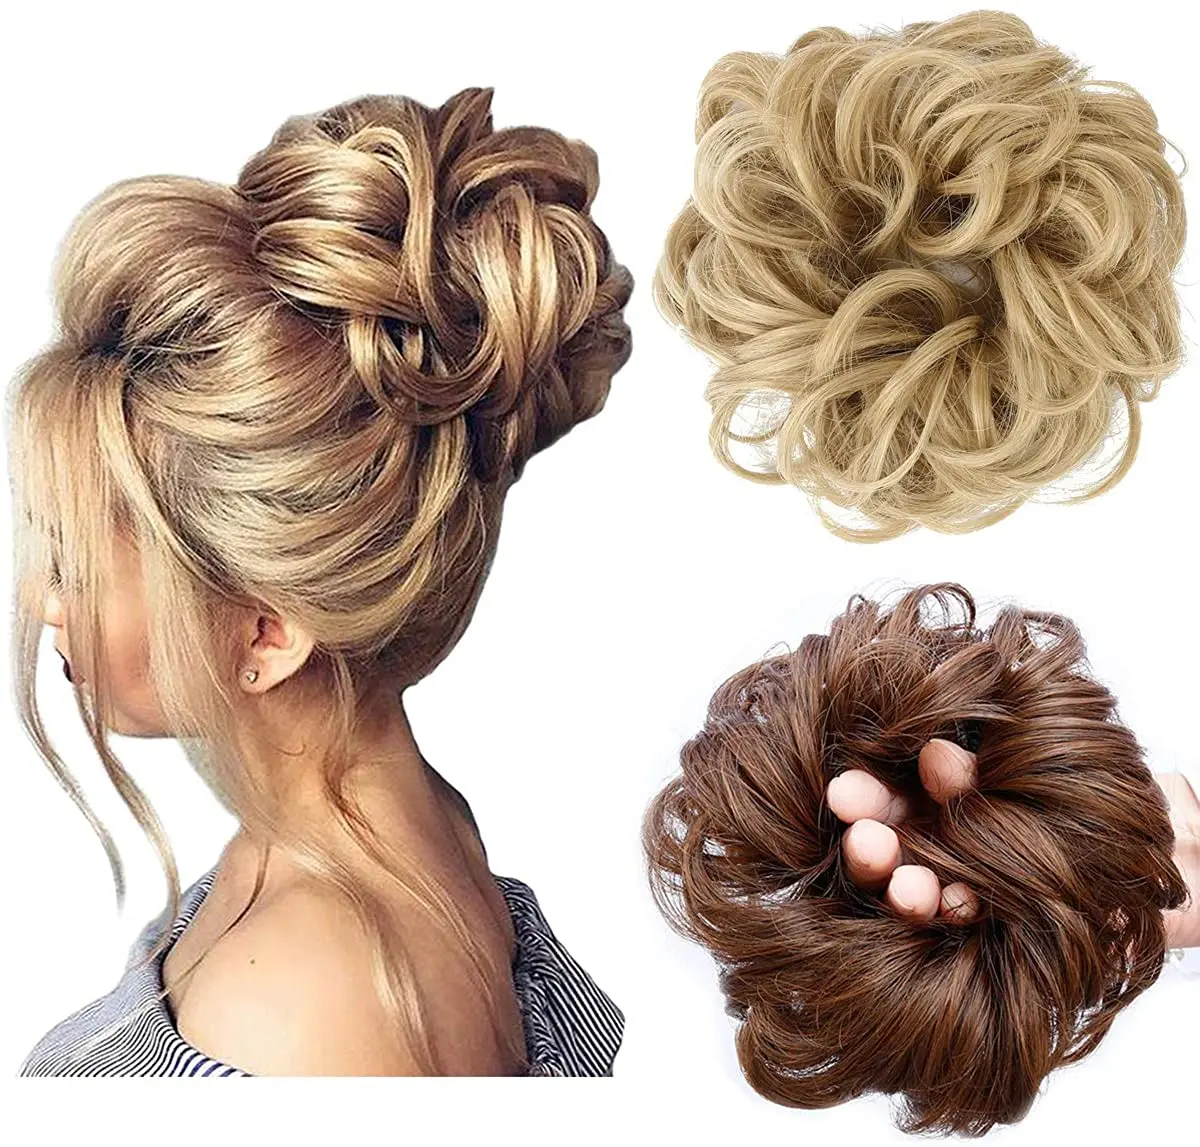 

Chignon Messy Bun Hair Piece Thick Updo Scrunchies Synthetic Hair Extensions Ponytail Hair Wig Hairpiece